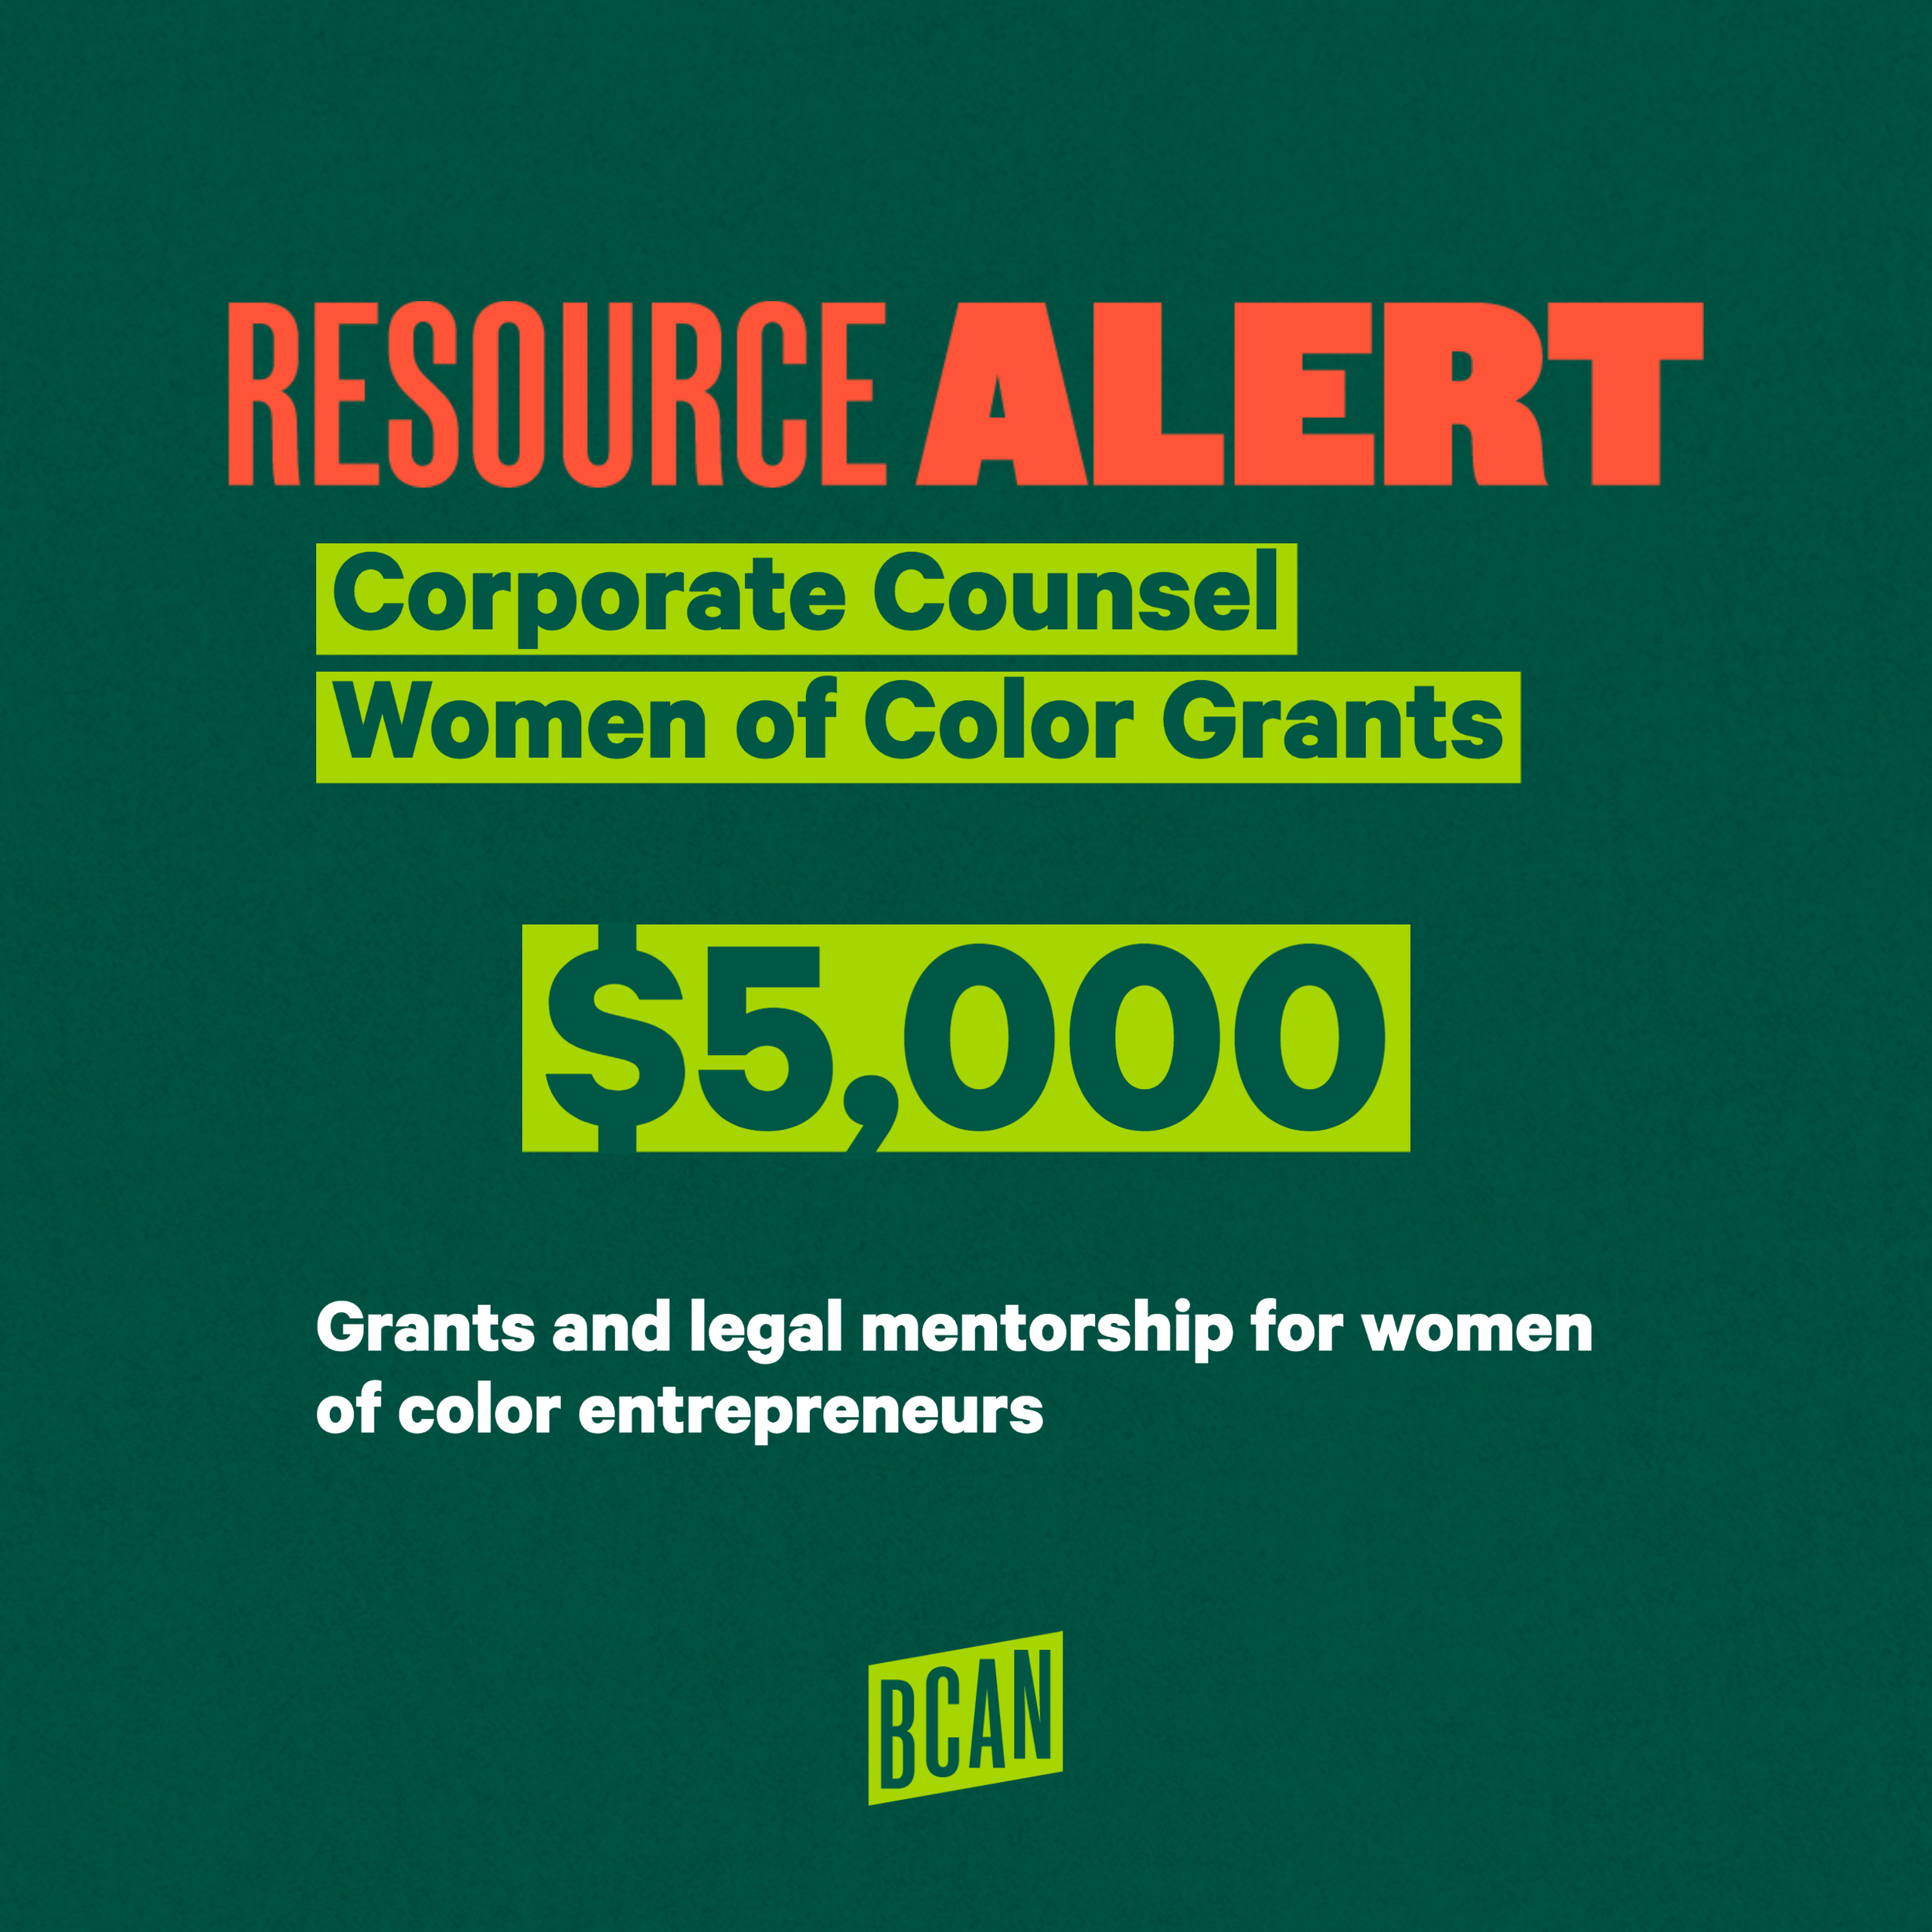 Corporate Counsel on Women Grants